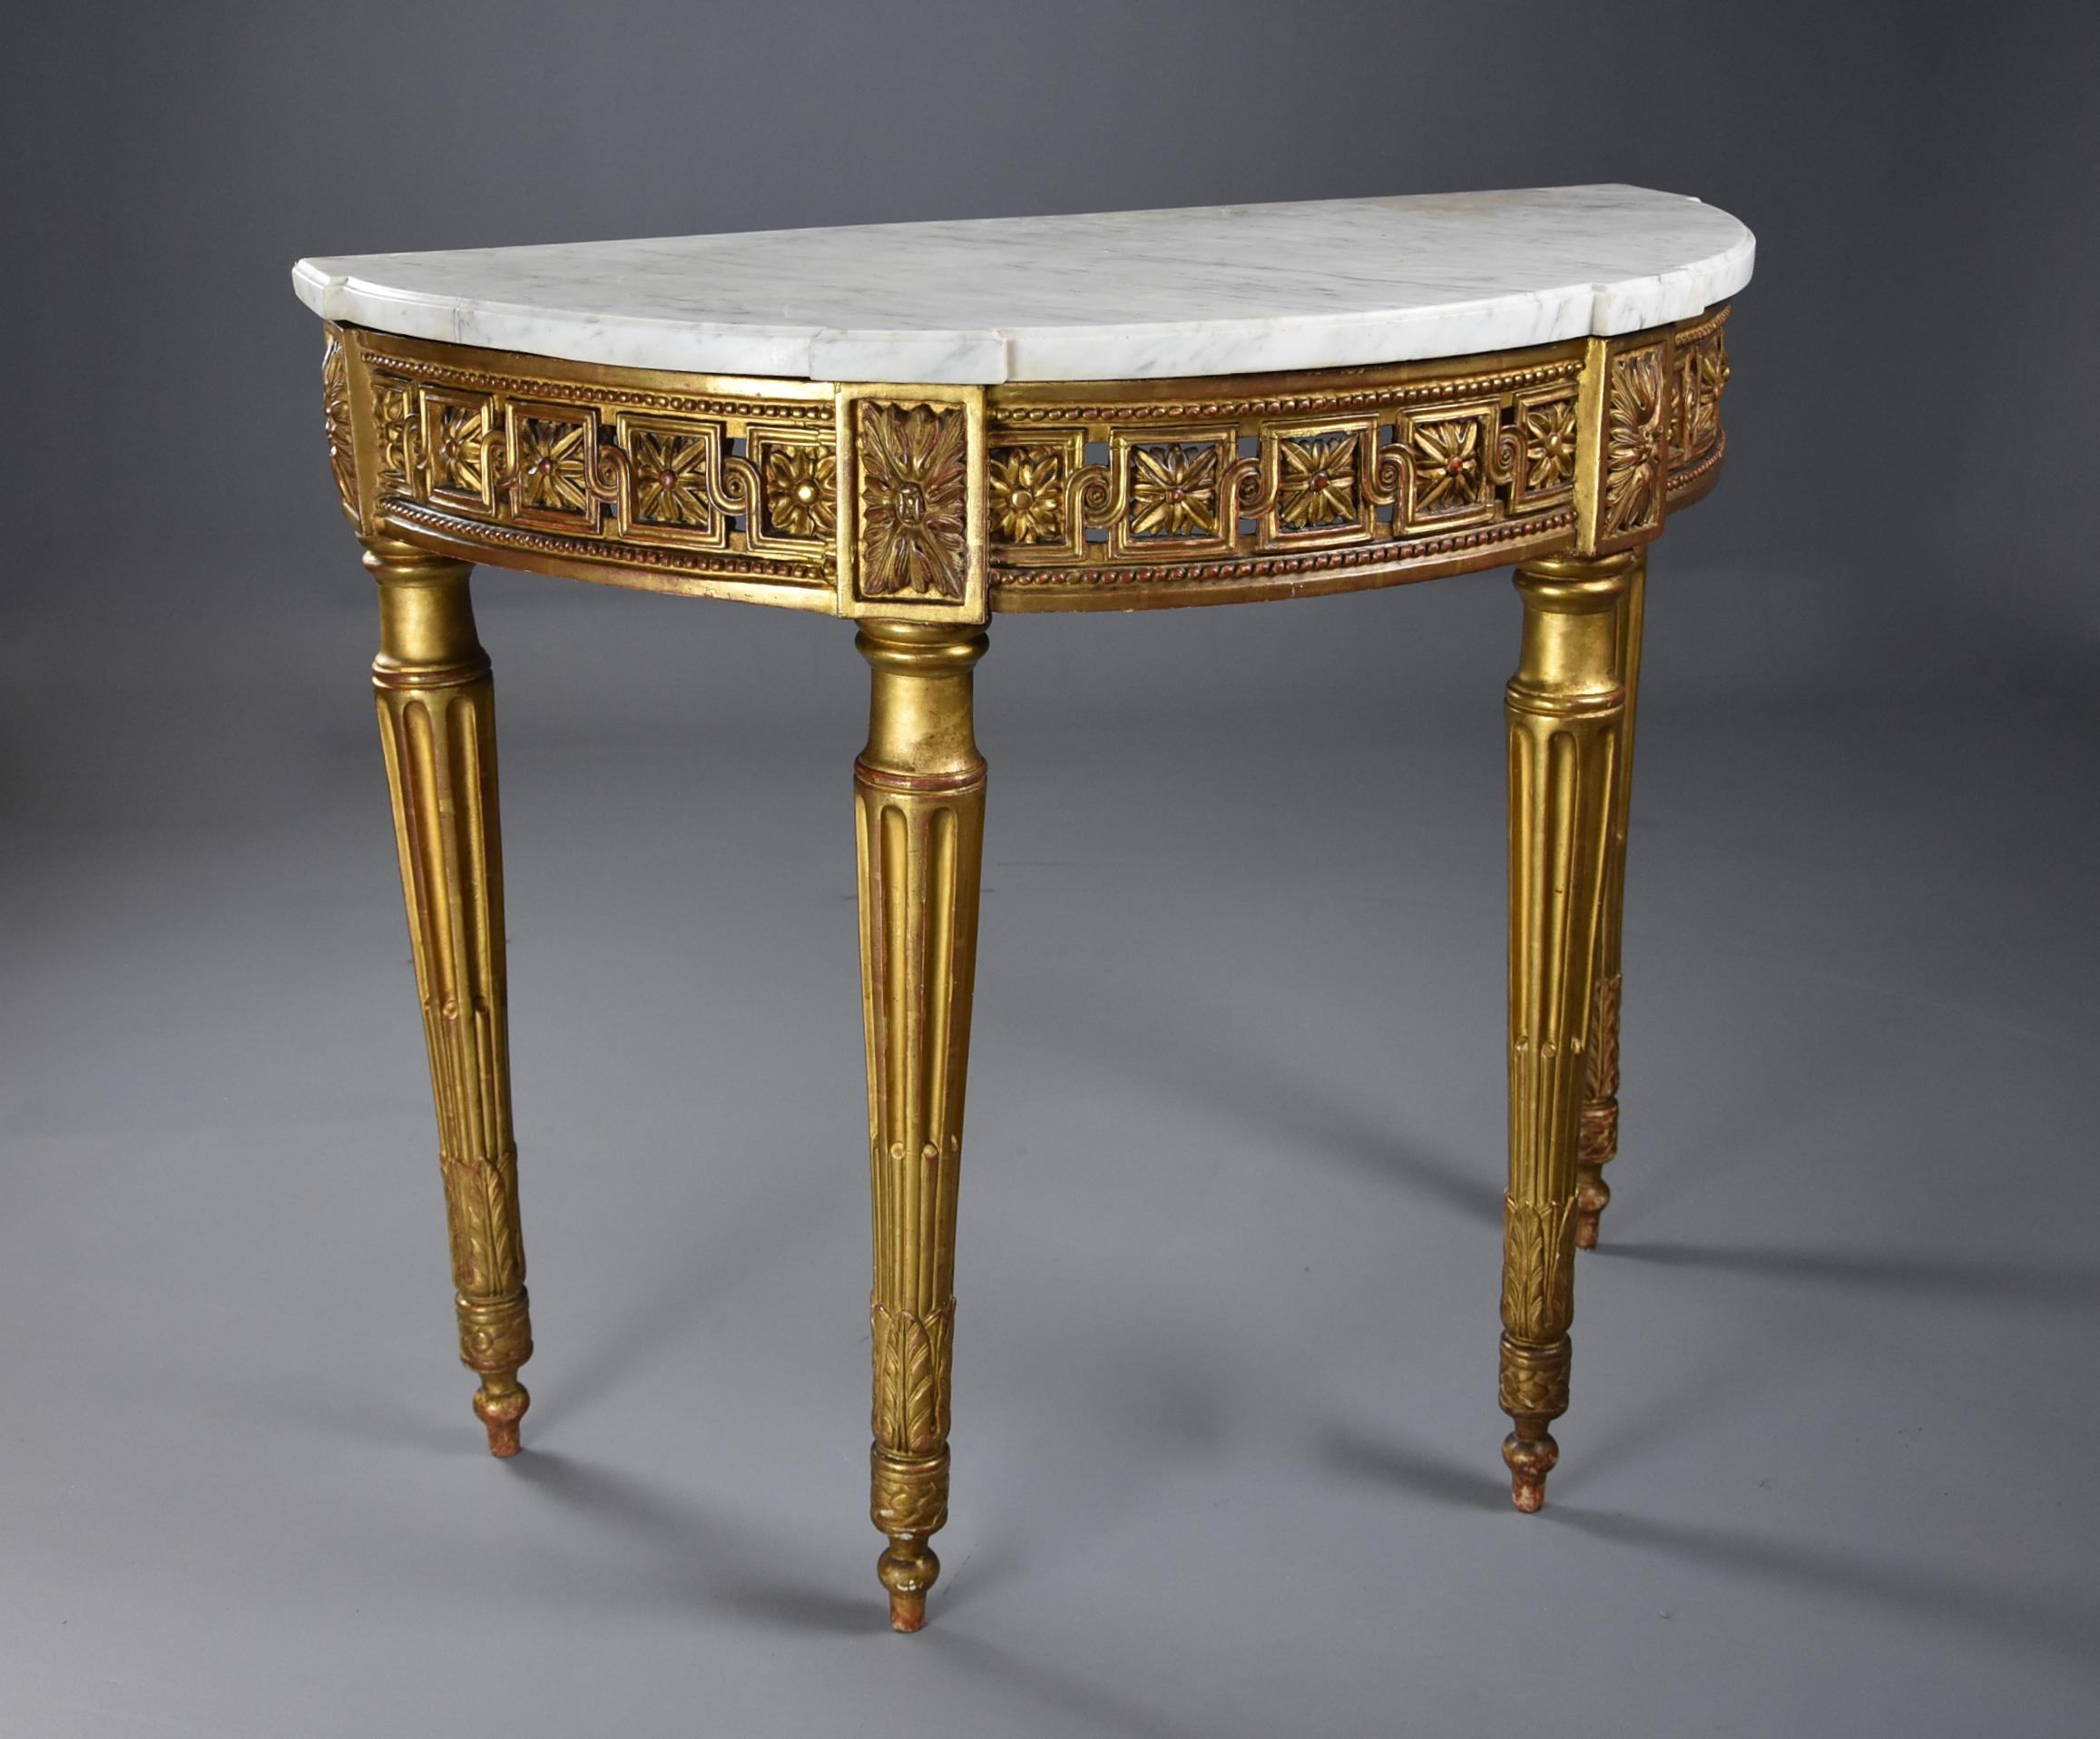 Marble Highly Decorative 19th Century French Demilune Gilt Console Table For Sale